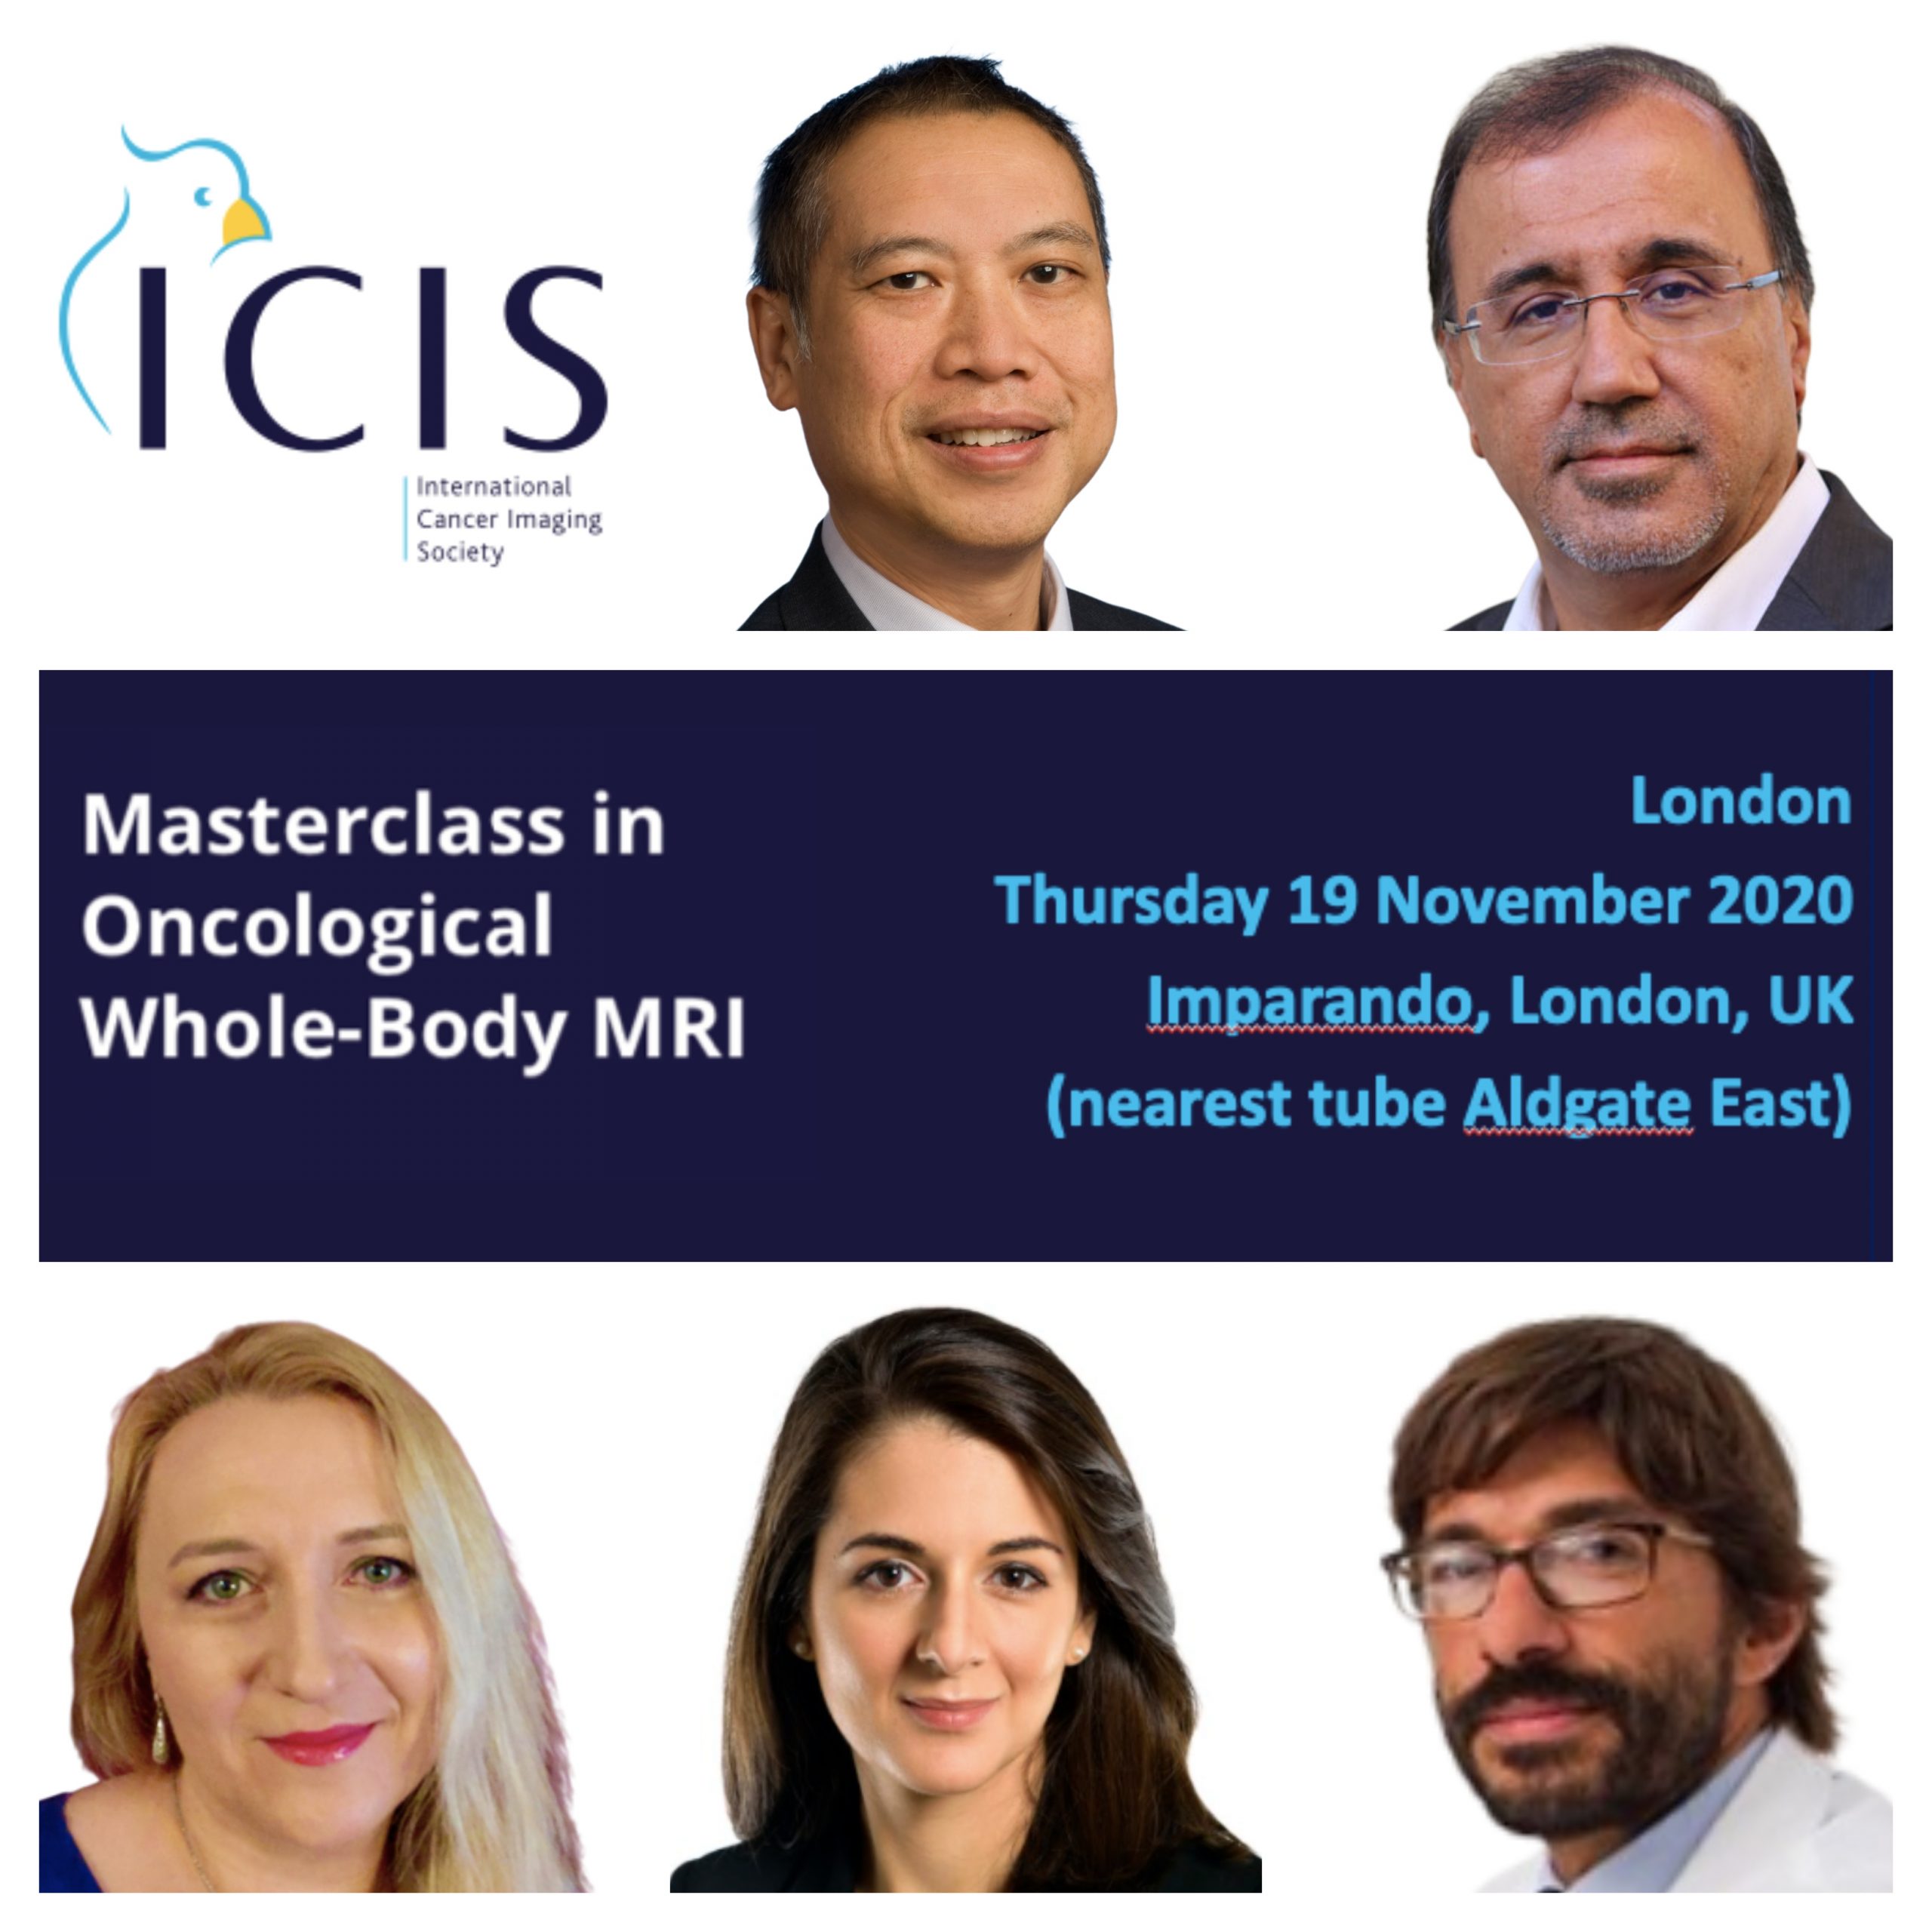 ICIS Masterclass in Oncological whole-body MRI